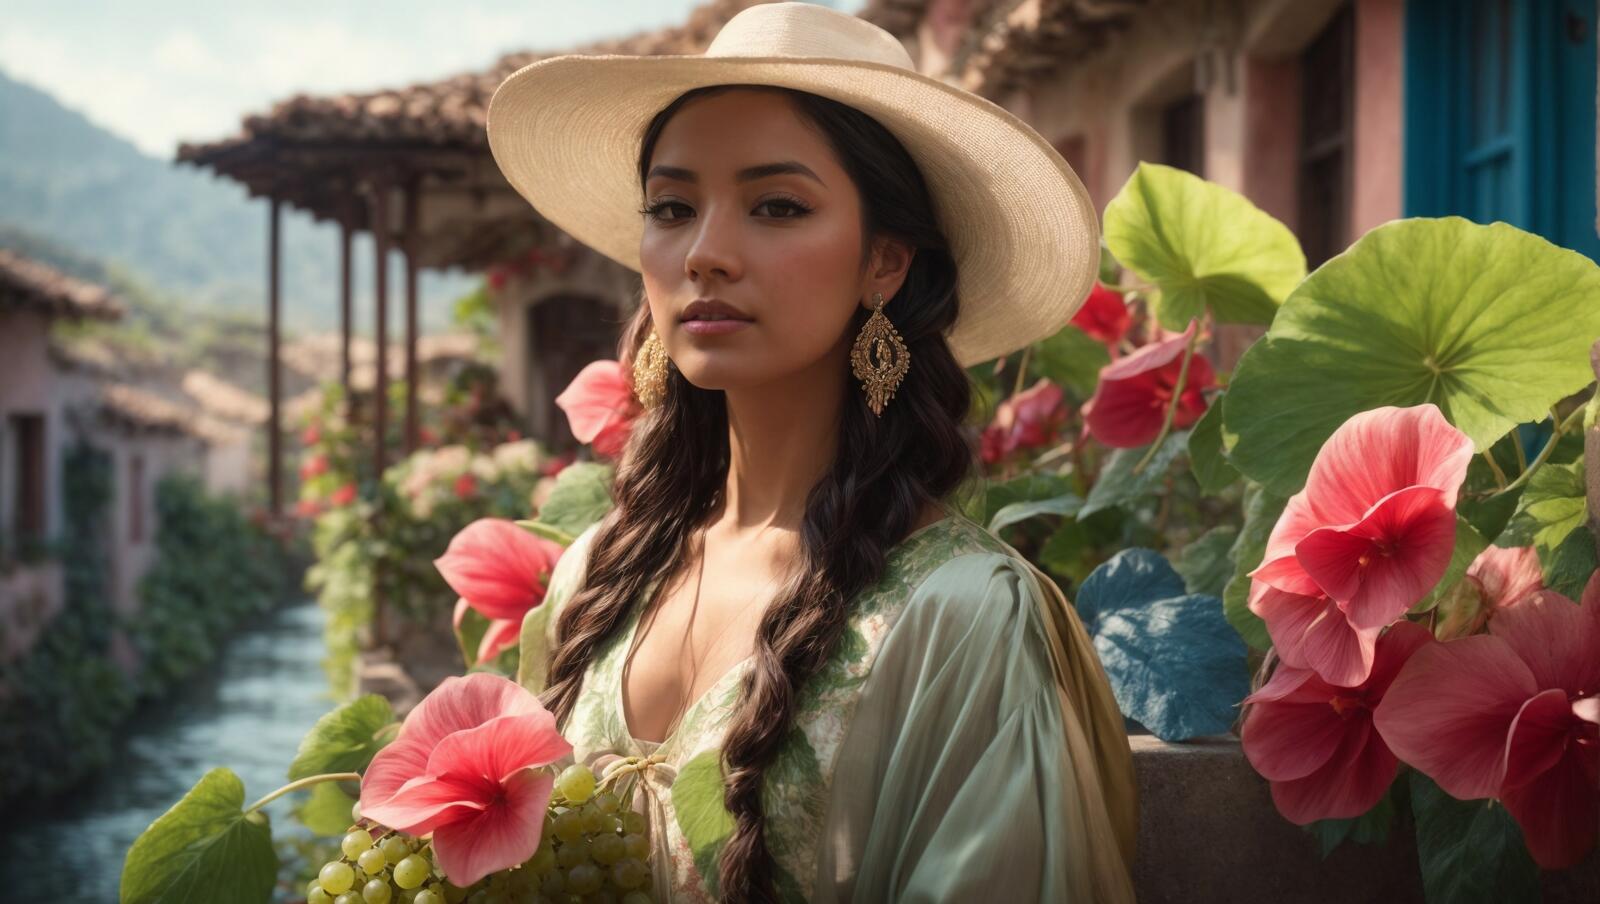 Free photo A woman wearing large earrings, in a straw hat and long dress is standing in front of flowers